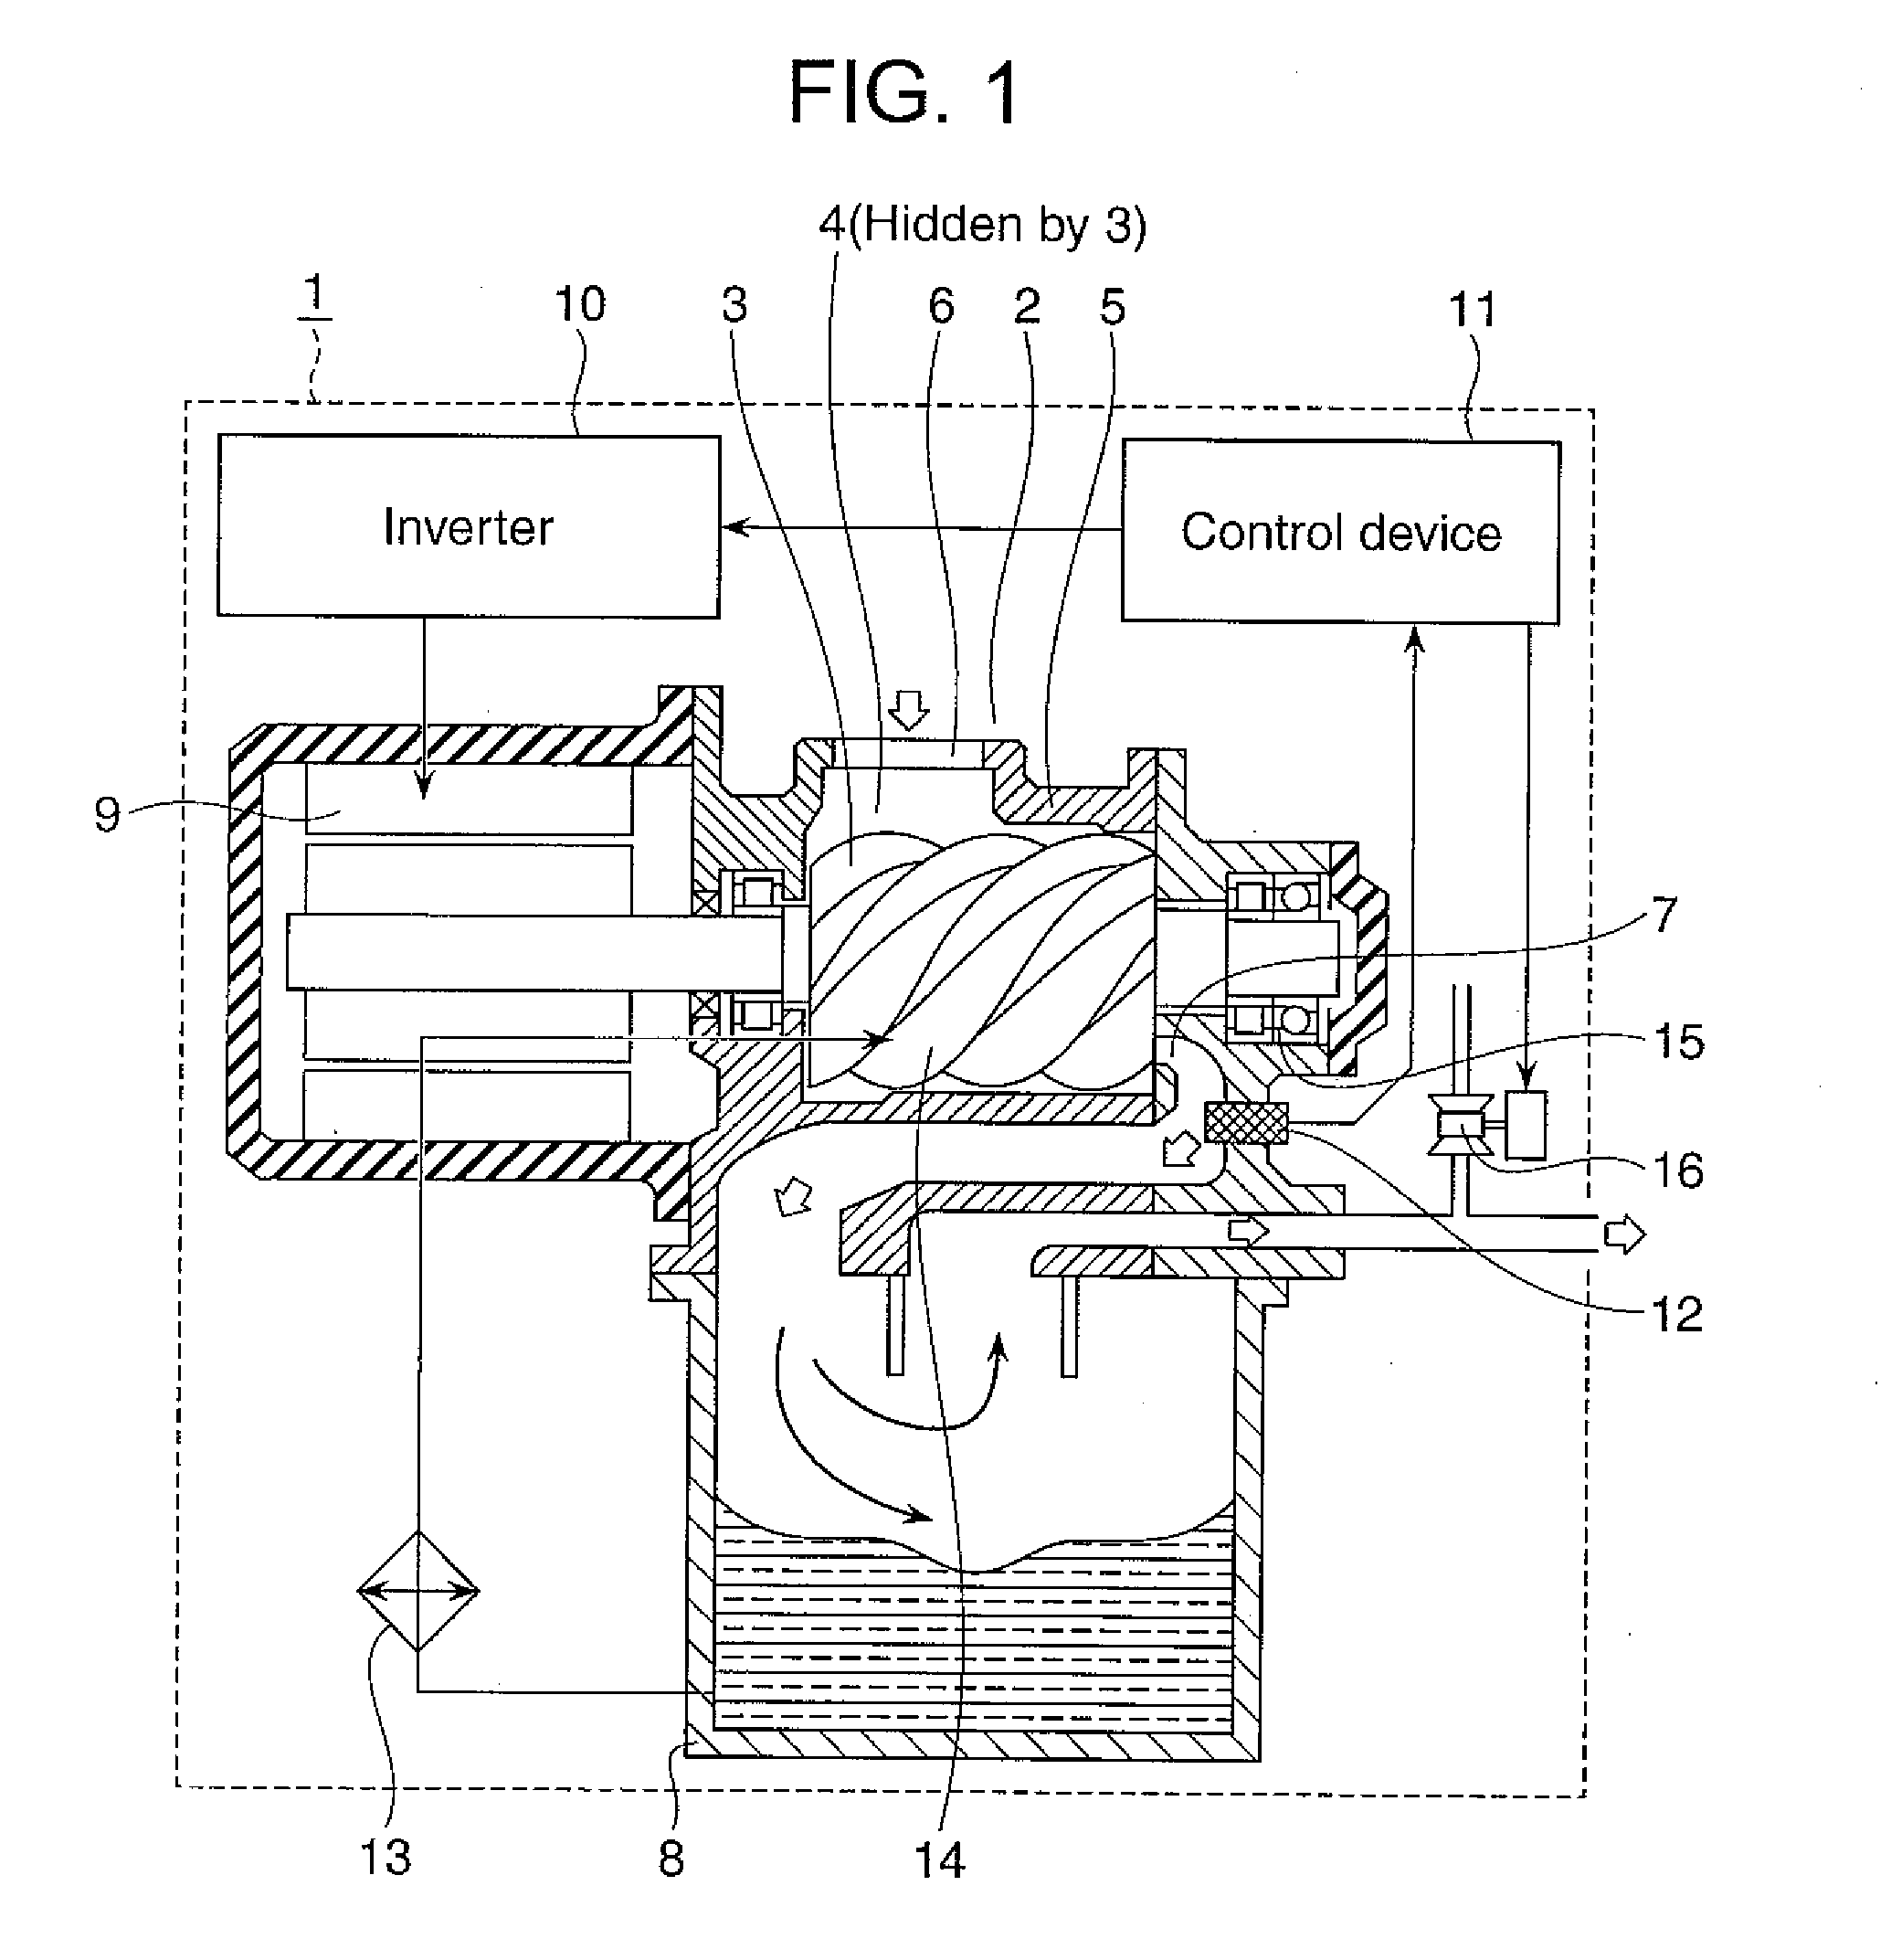 Oil-flooded screw compressor, motor drive system, and motor control device